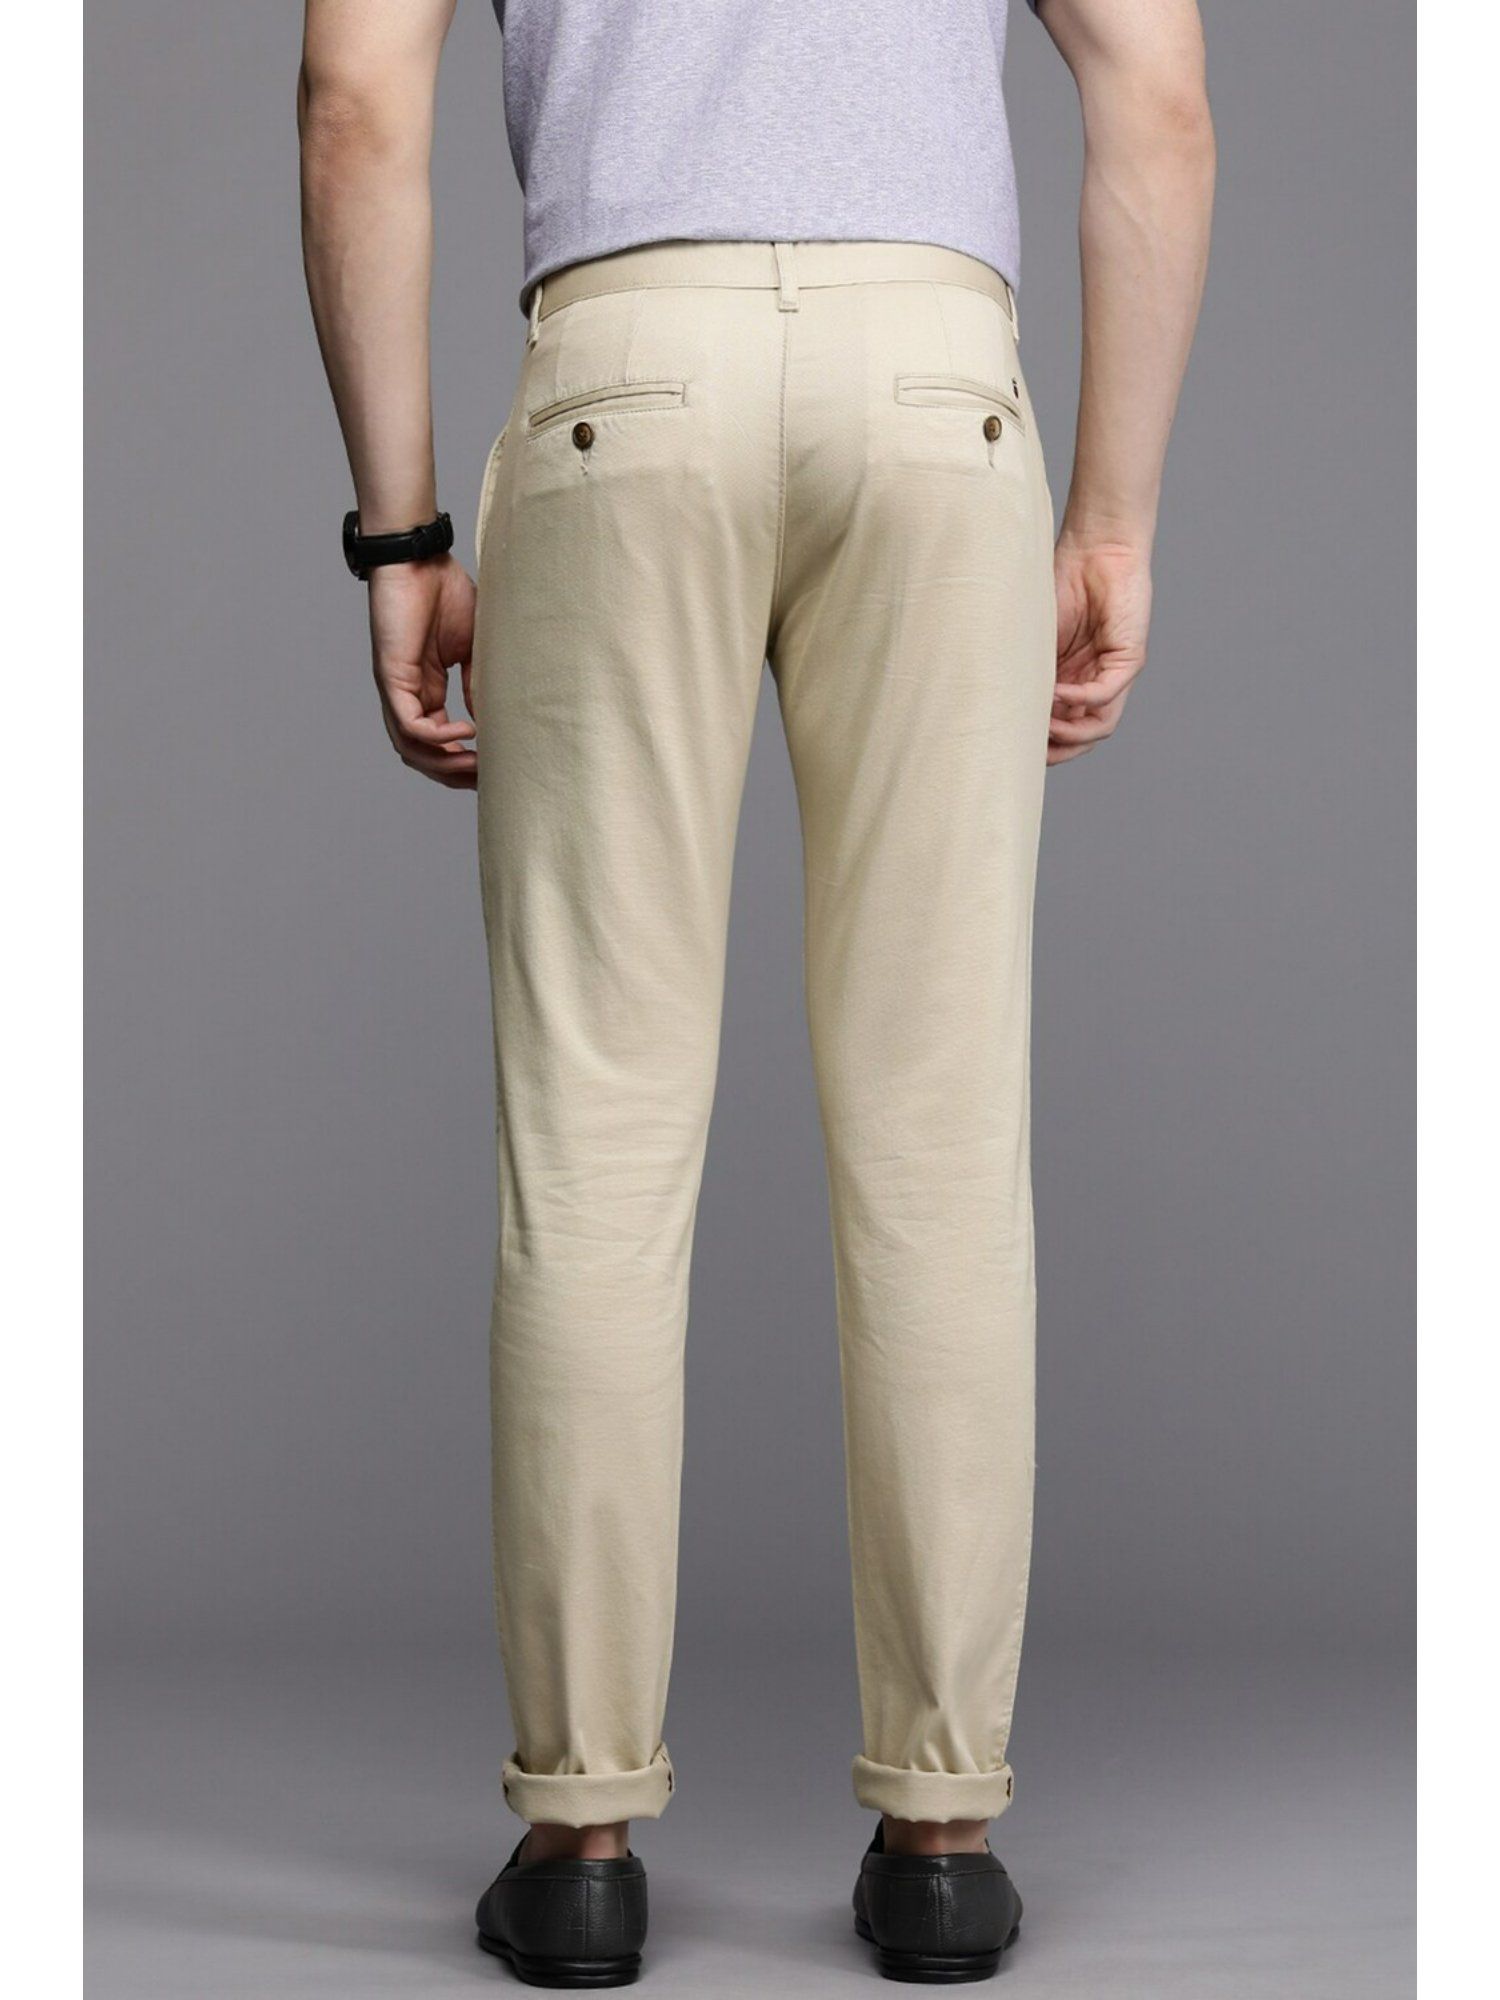 Buy louis philippe trousers in India @ Limeroad